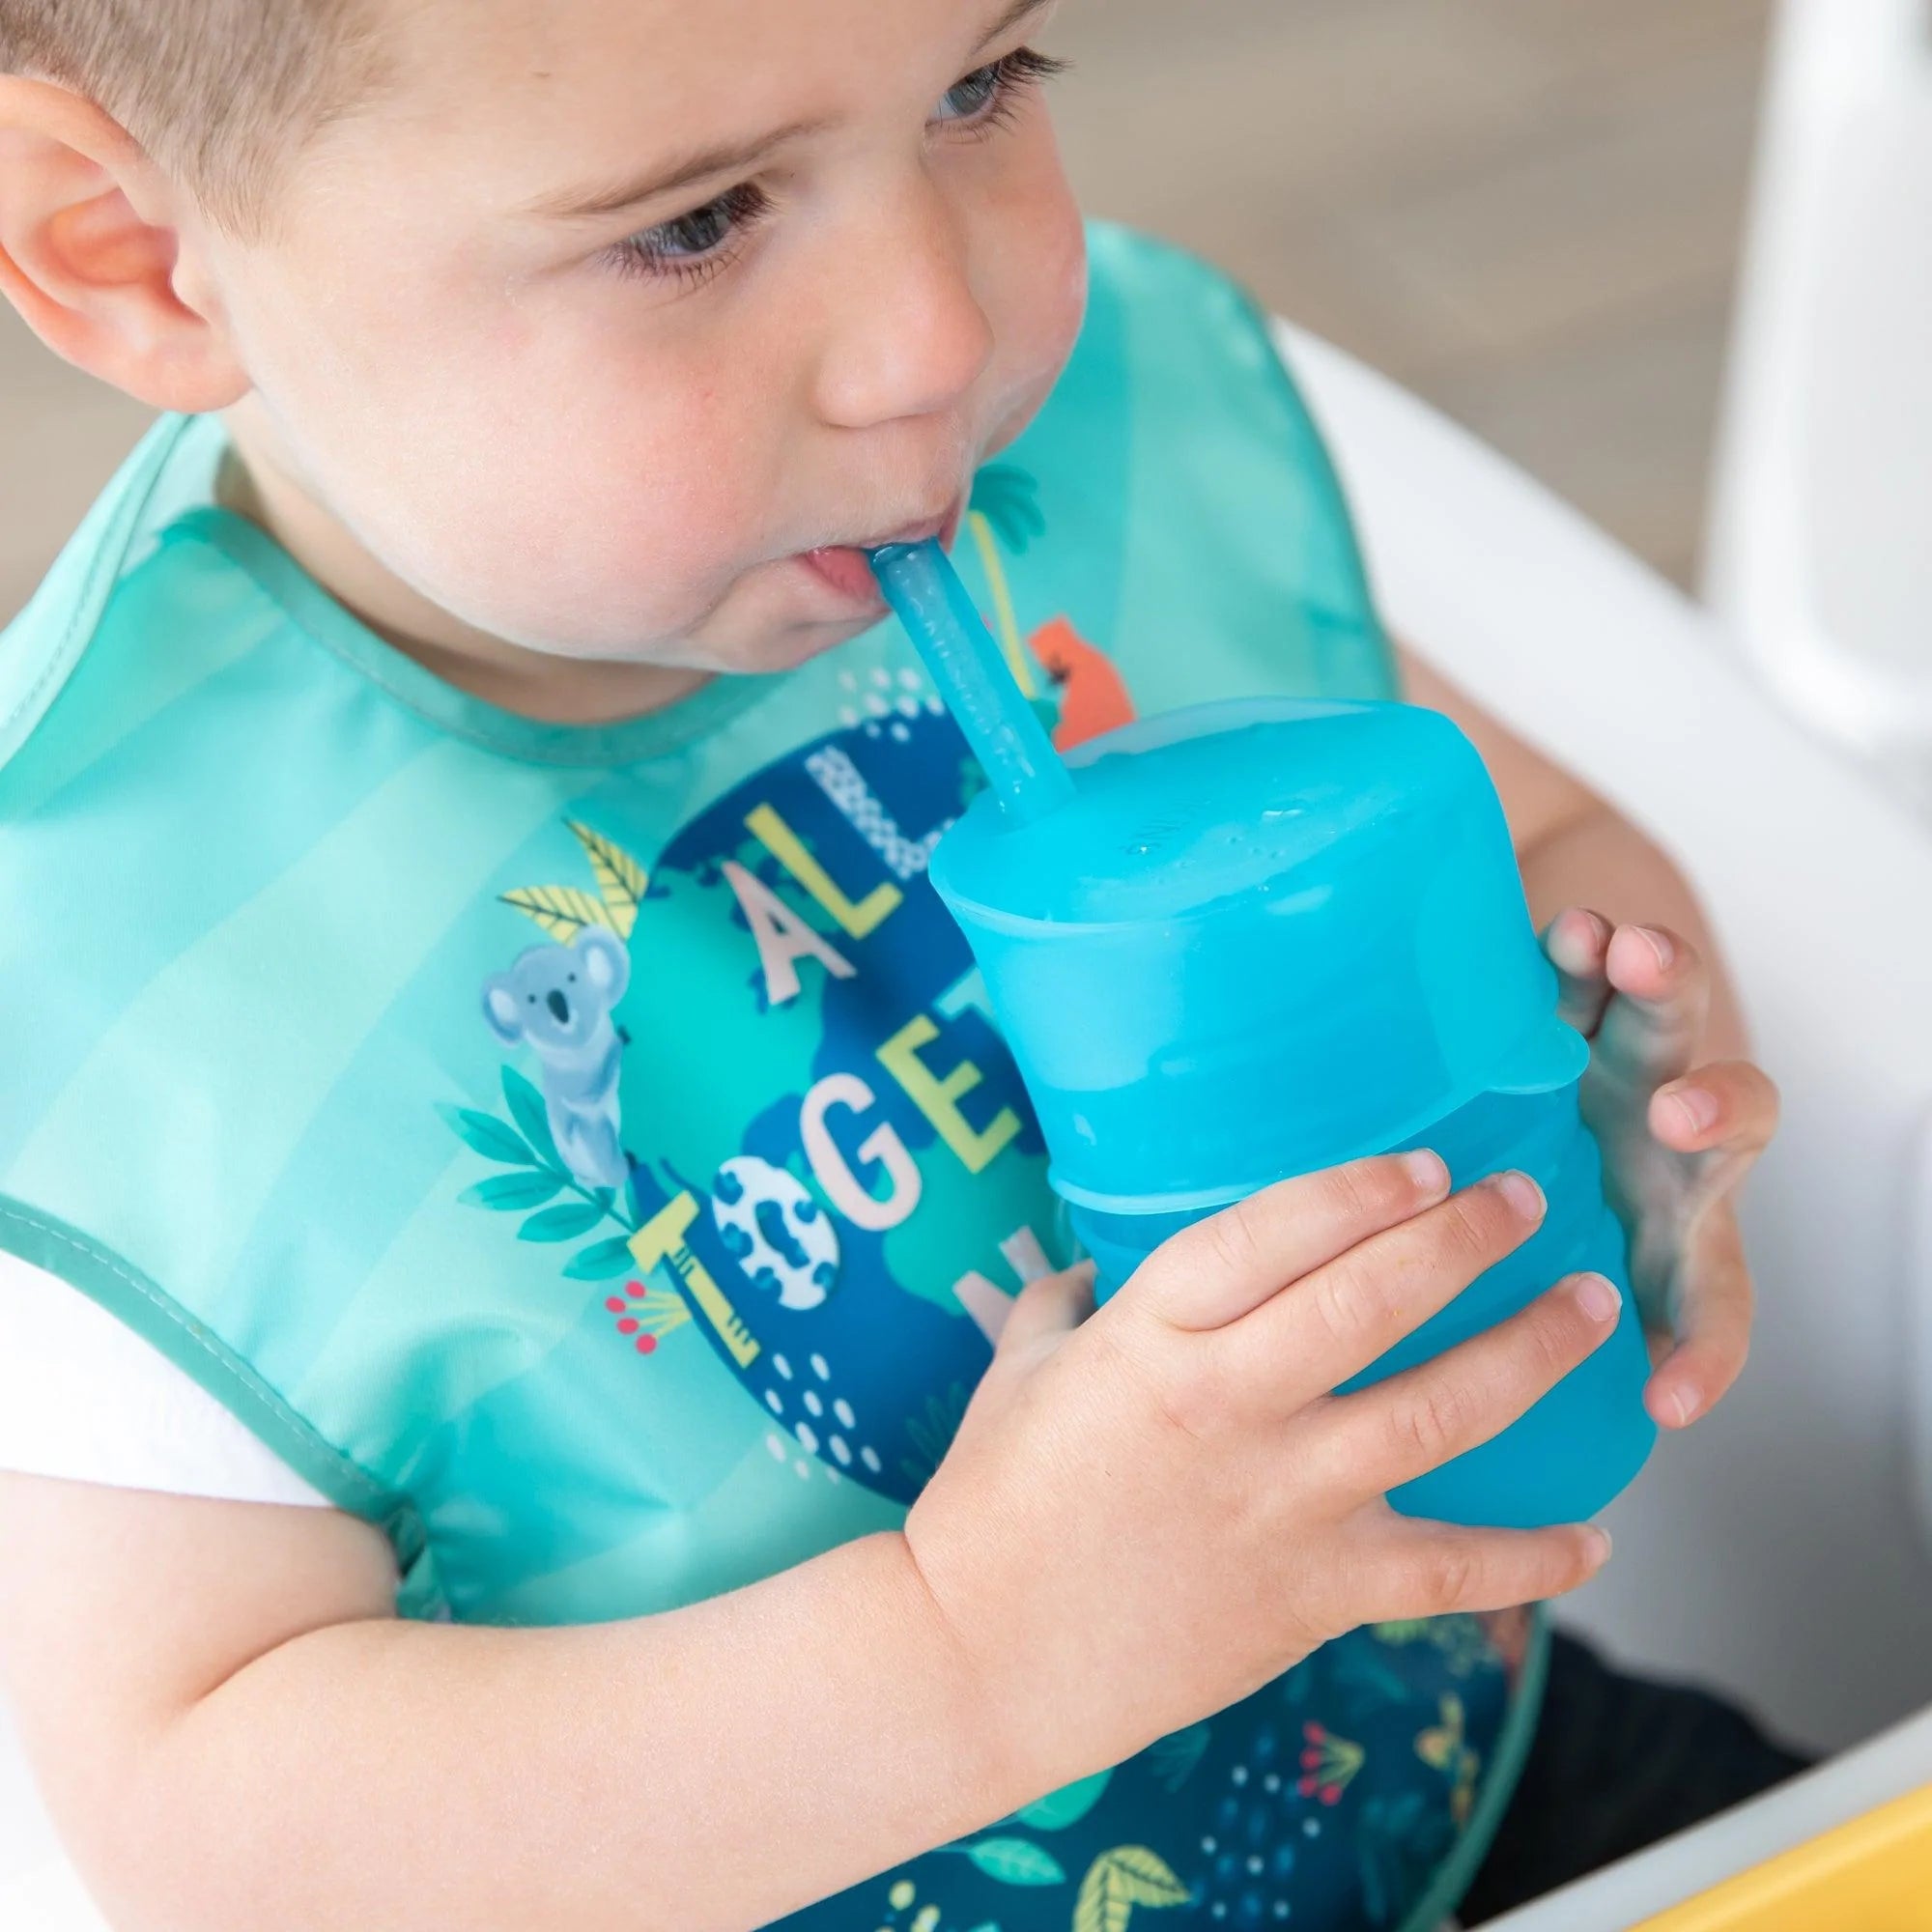 Straw Sippy Cups, Straw Cups for Babies & Toddlers